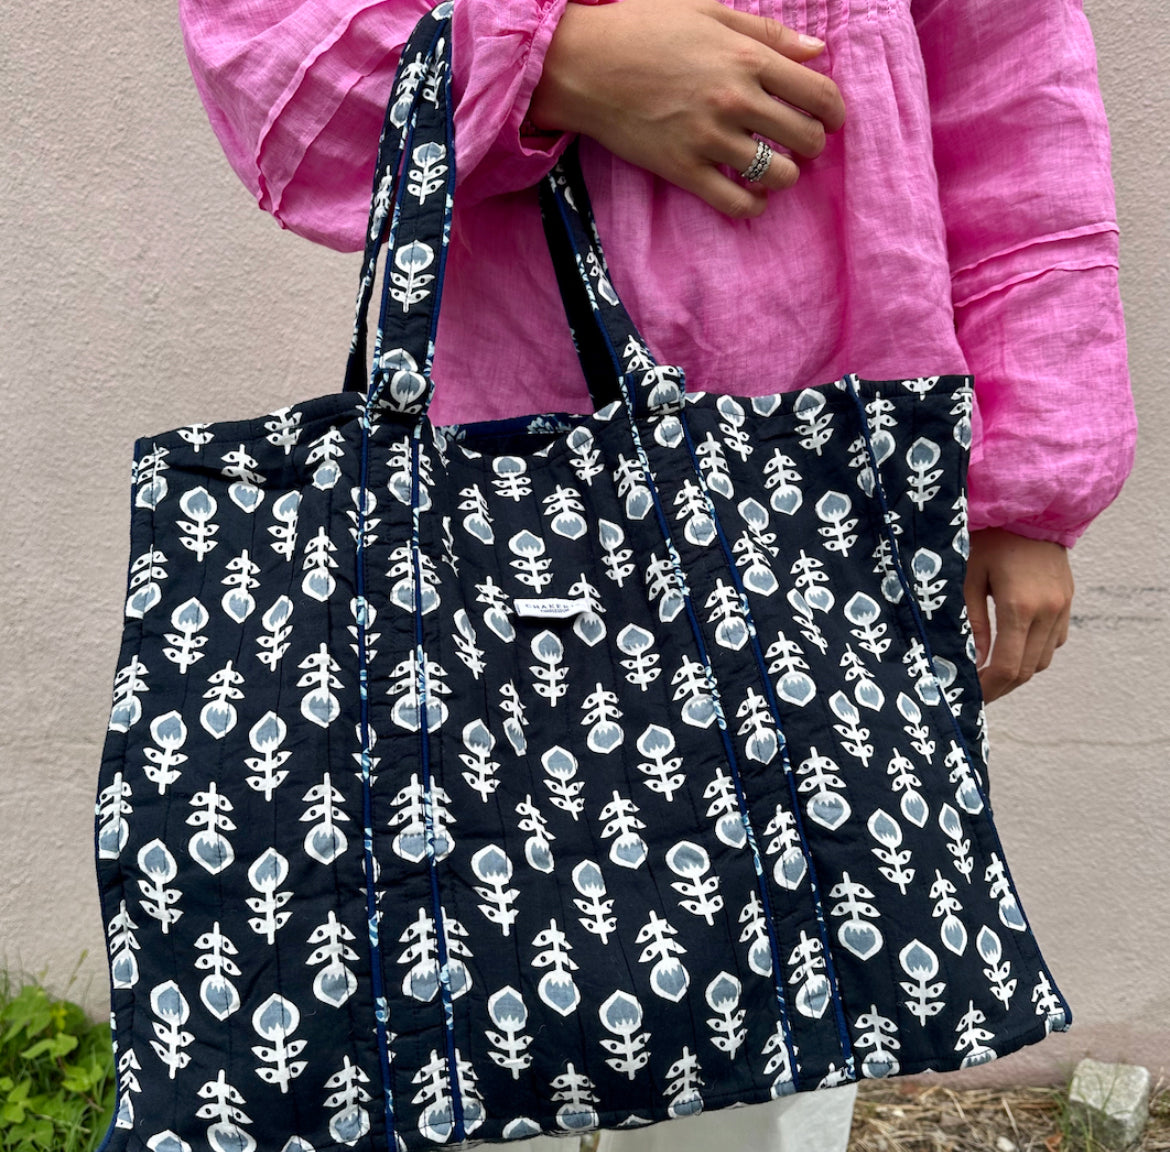 Tote Bag – Sweetgrass and Sand Dollars Boutique